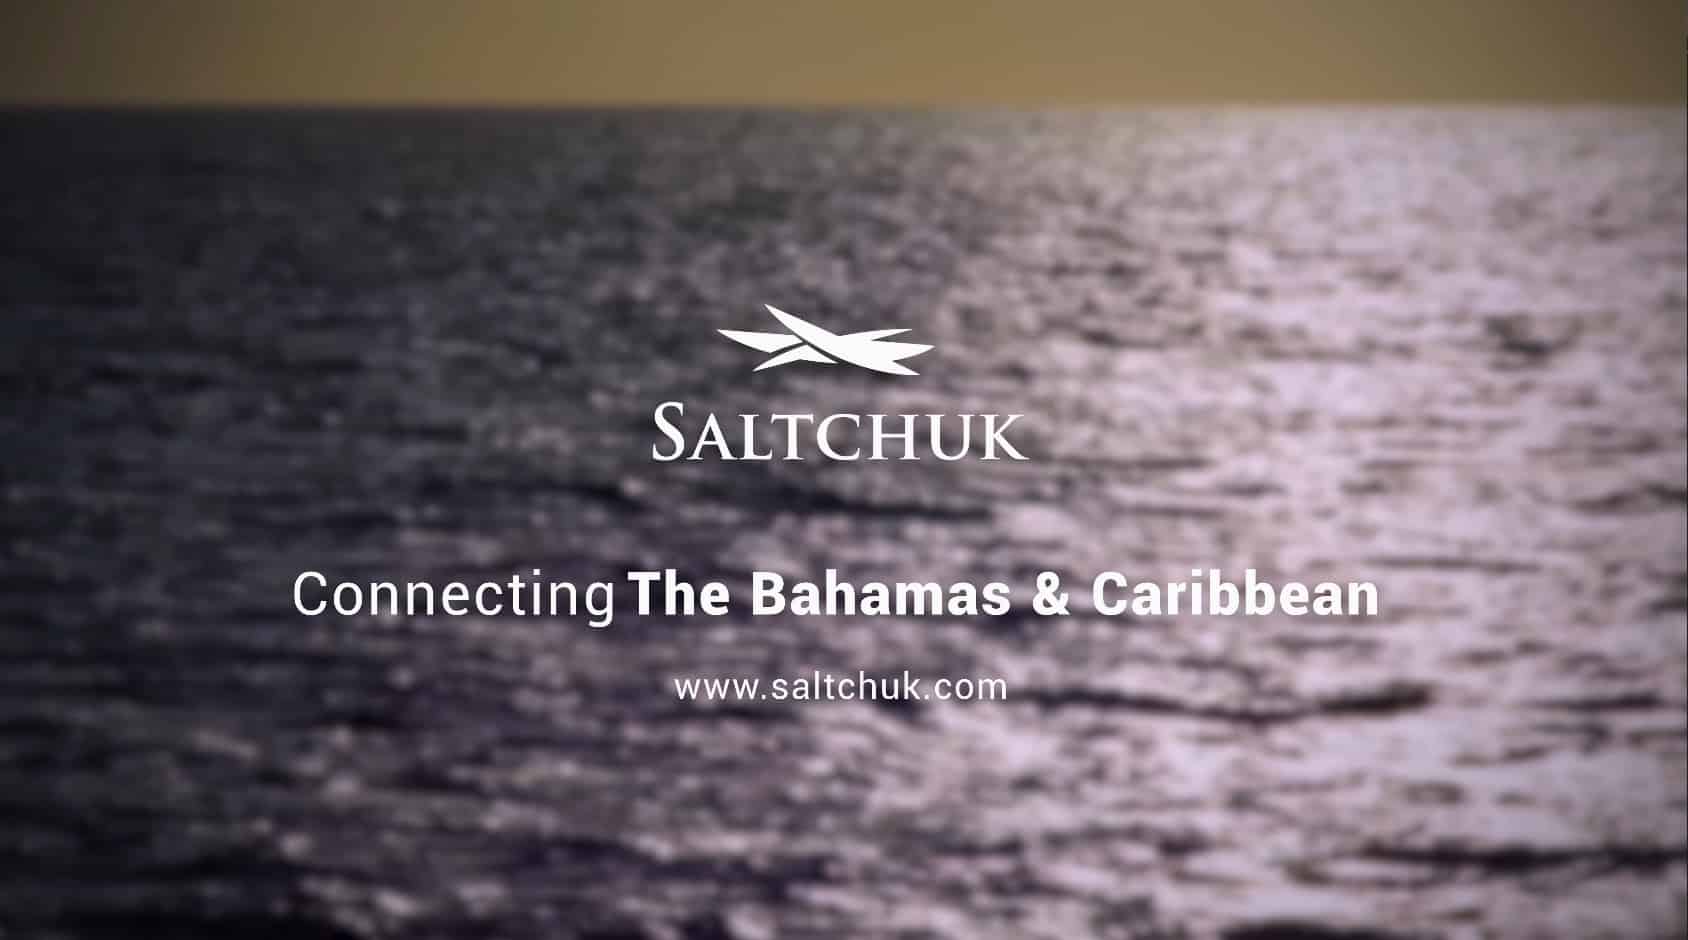 Saltchuk logo with the ocean in the background.